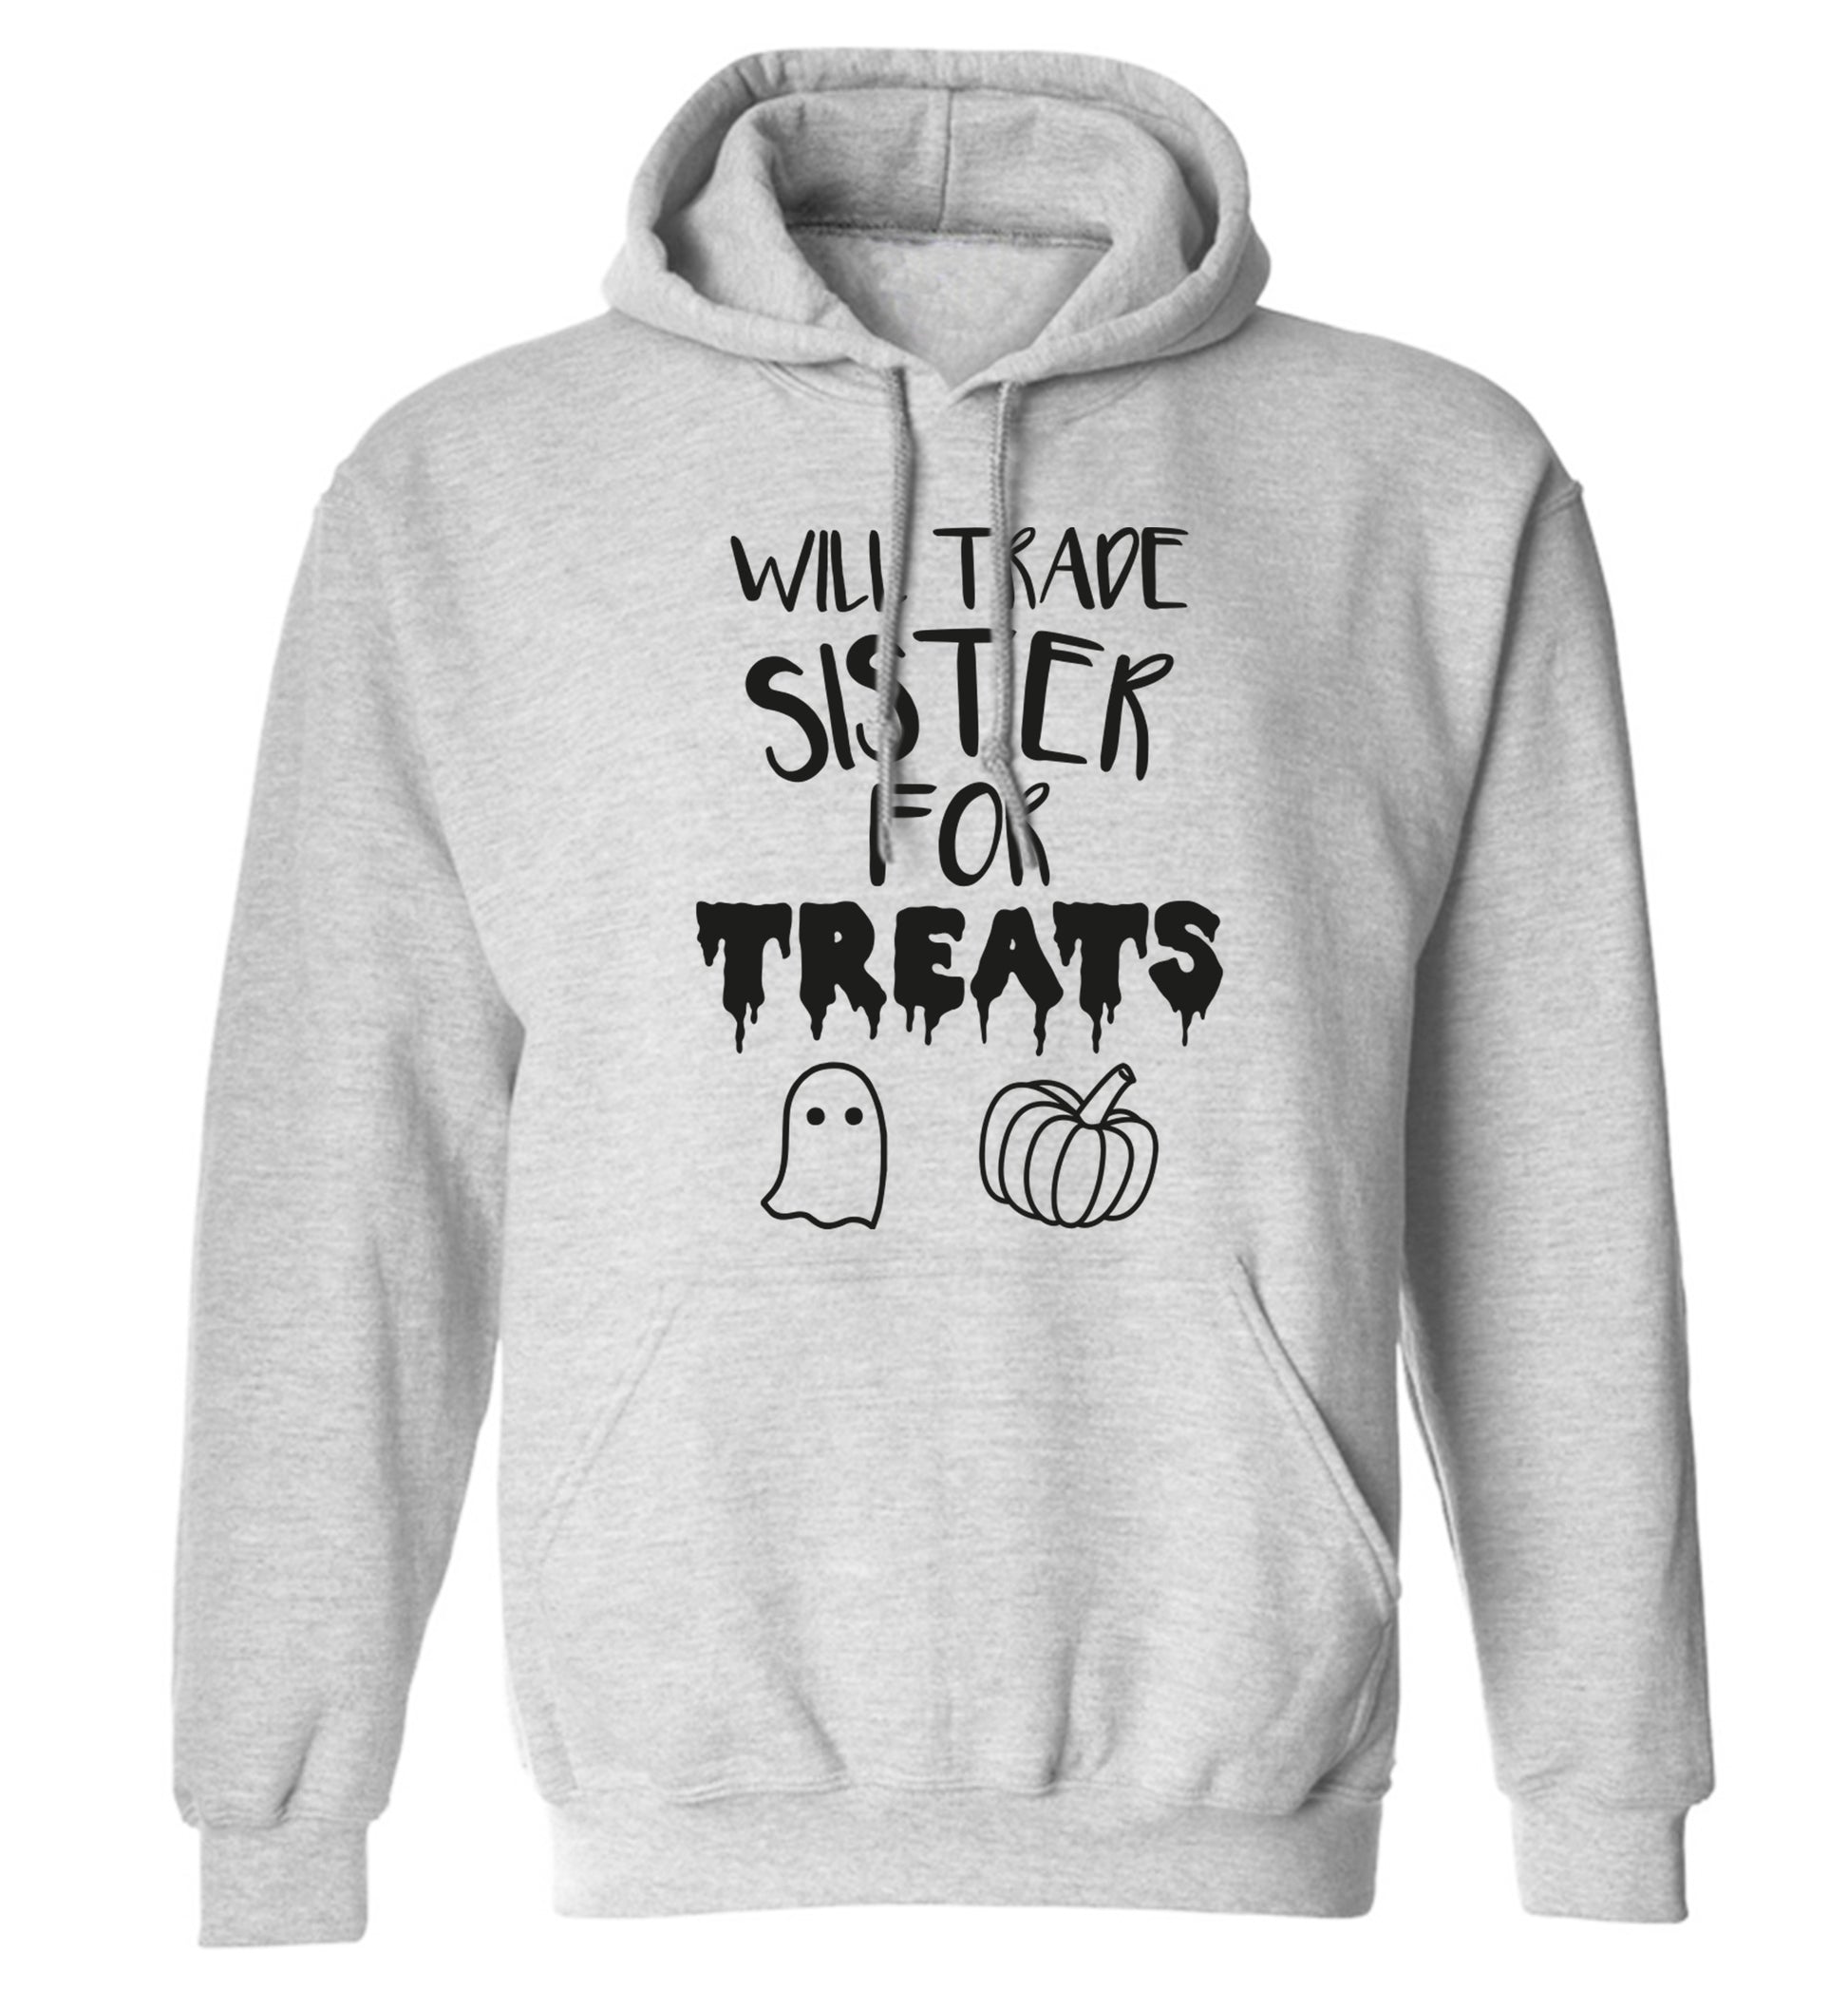 Will trade sister for treats adults unisex grey hoodie 2XL